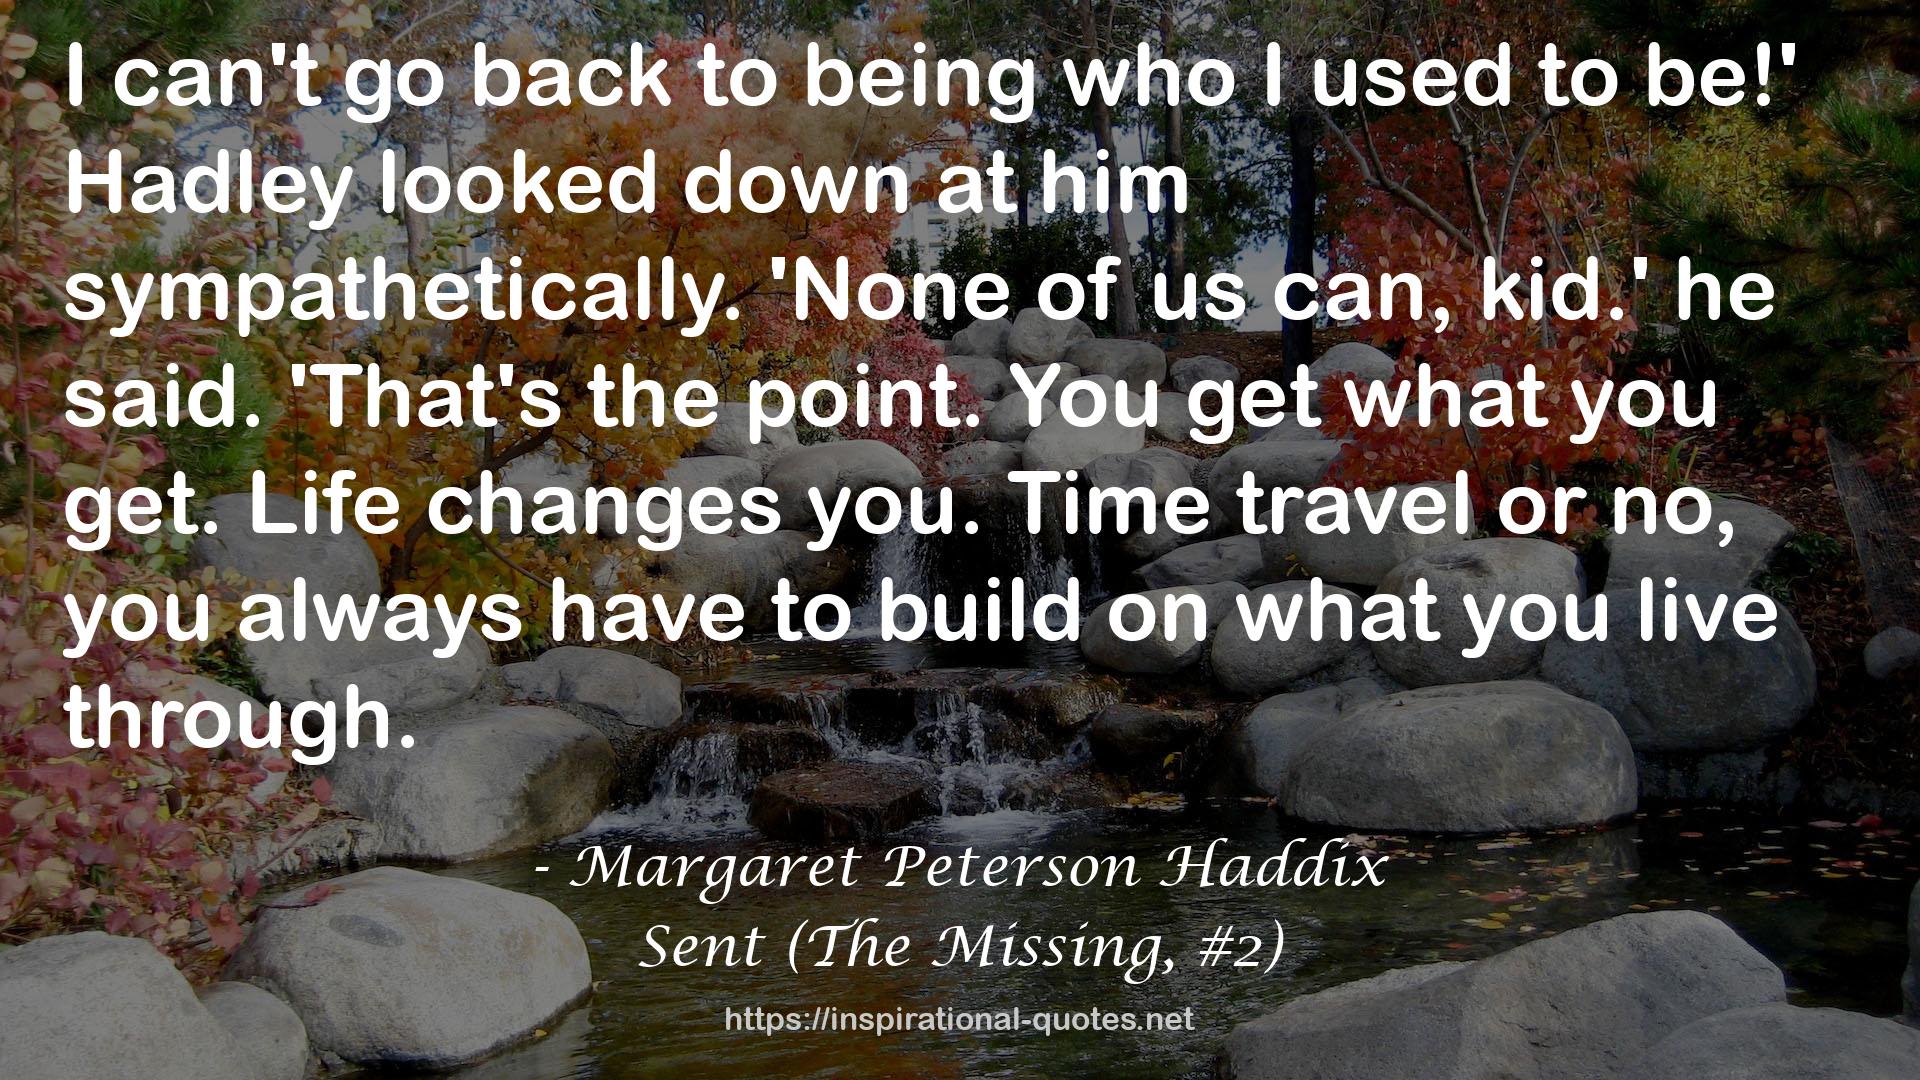 Sent (The Missing, #2) QUOTES